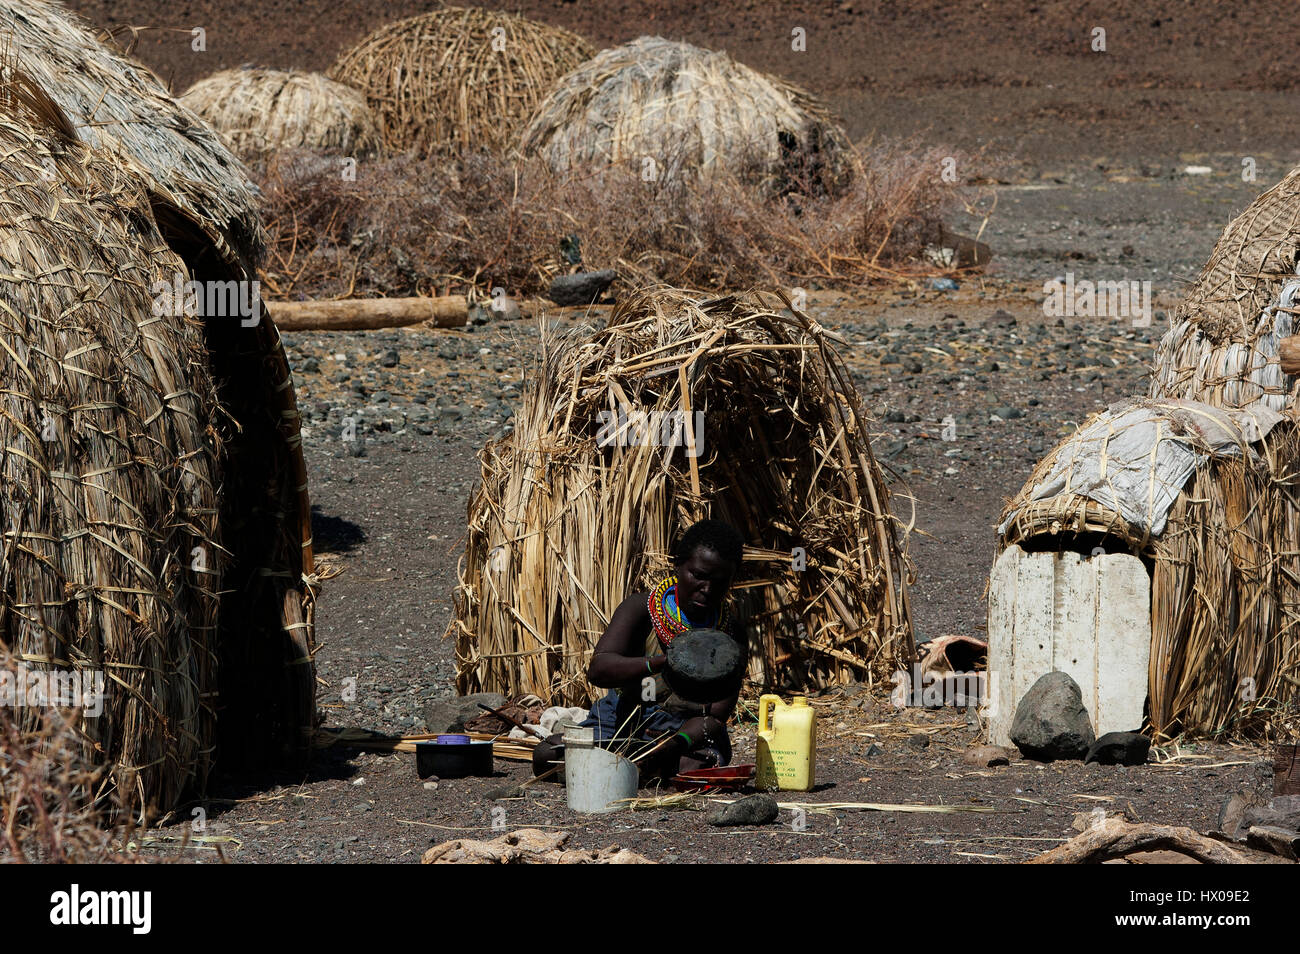 El Molo is the smallest african tribe with around 150 individuals living in primitive huts at the shores of the migthy Lake Turkana, Kenya Stock Photo